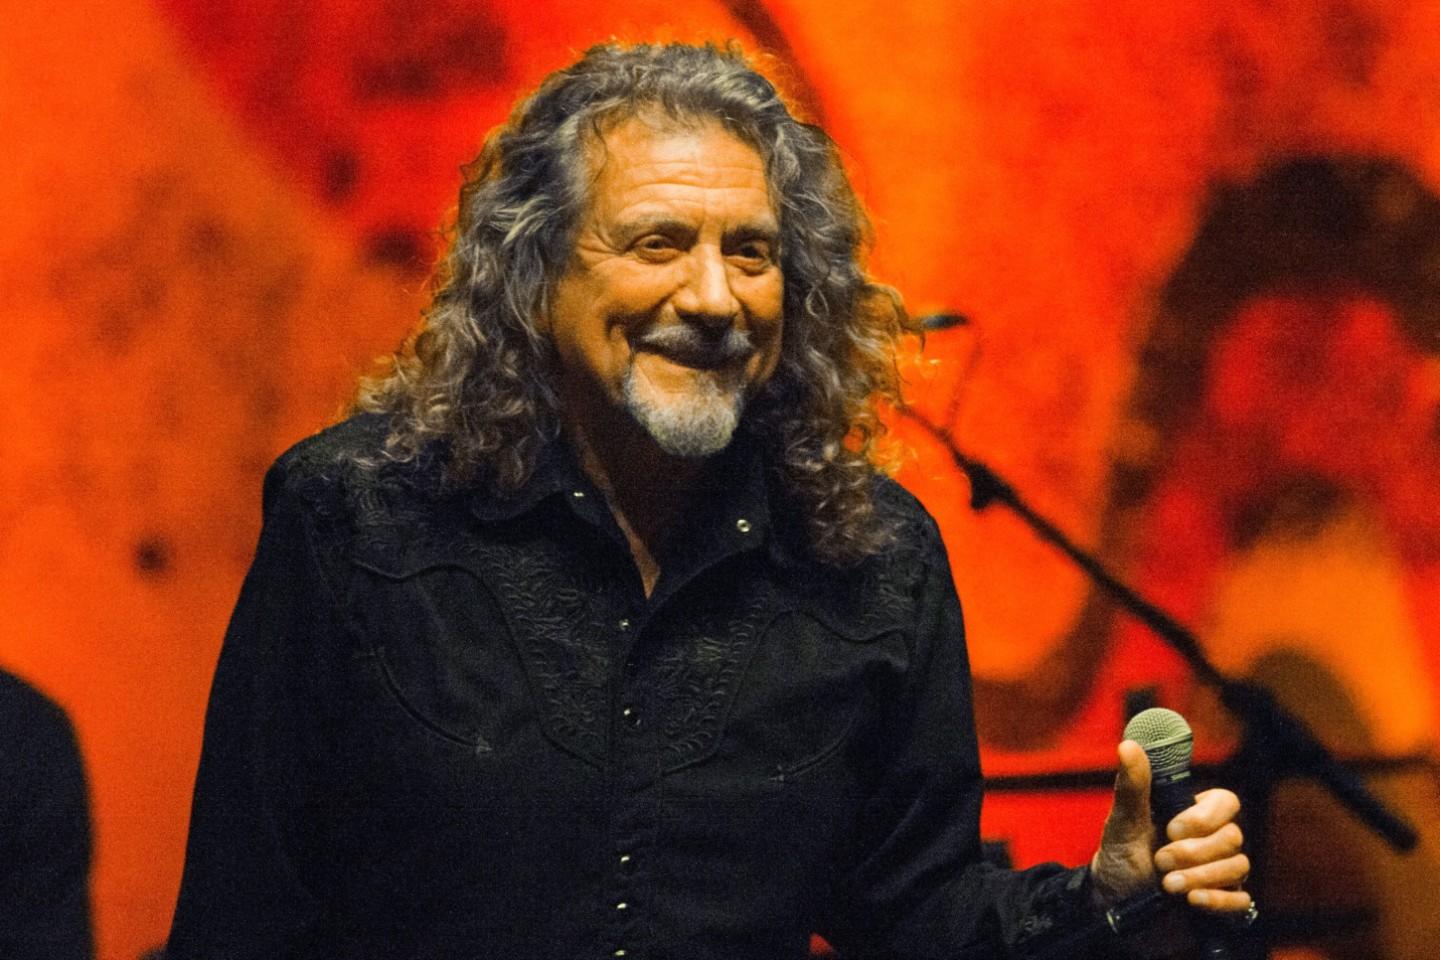 is robert plant going on tour